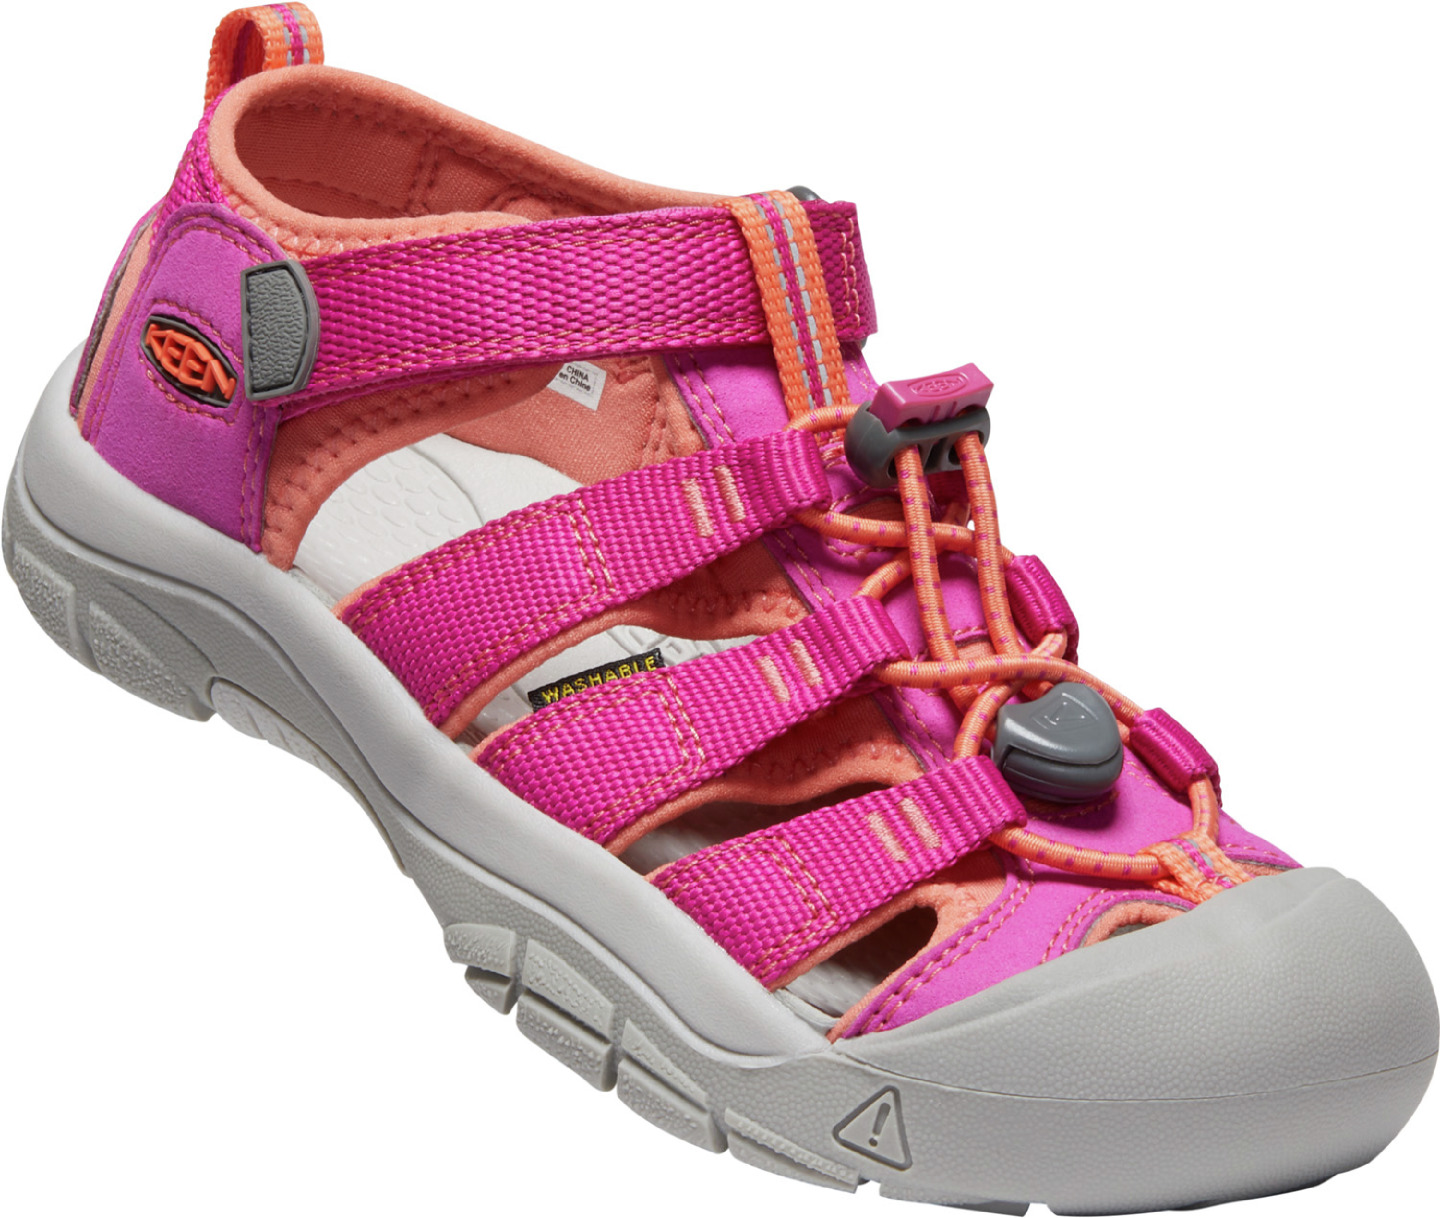 Keen dětské sandály Newport H2 Youth Very Berry/Fusion Coral Barva: very berry/fusion coral, Velikost: 2 UK (35 EU / 22 cm)